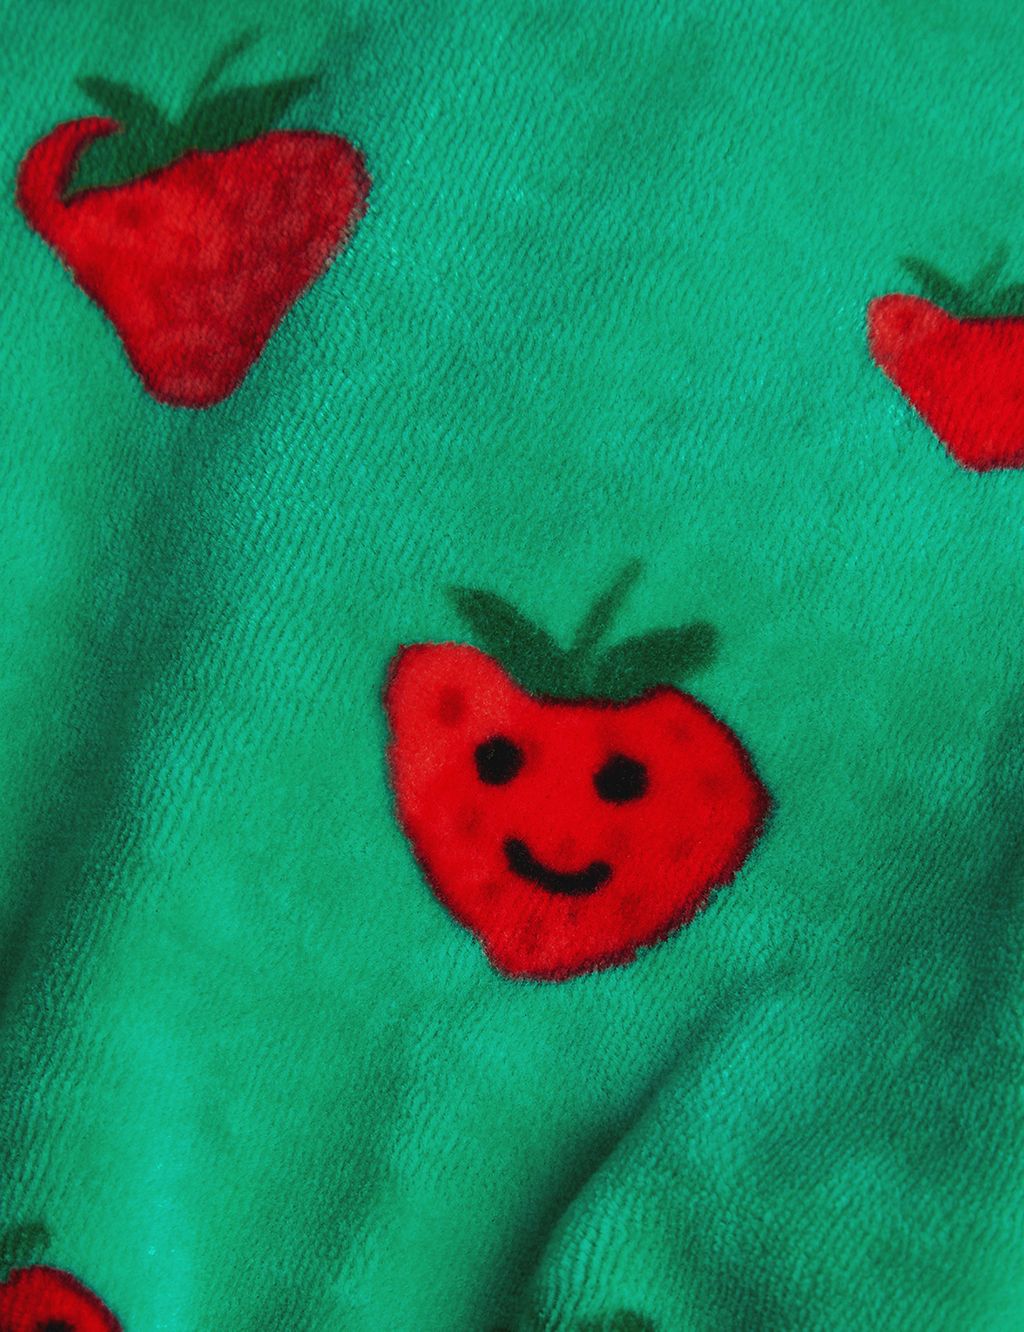 Velour Strawberry Top (3-13 Yrs) 1 of 4